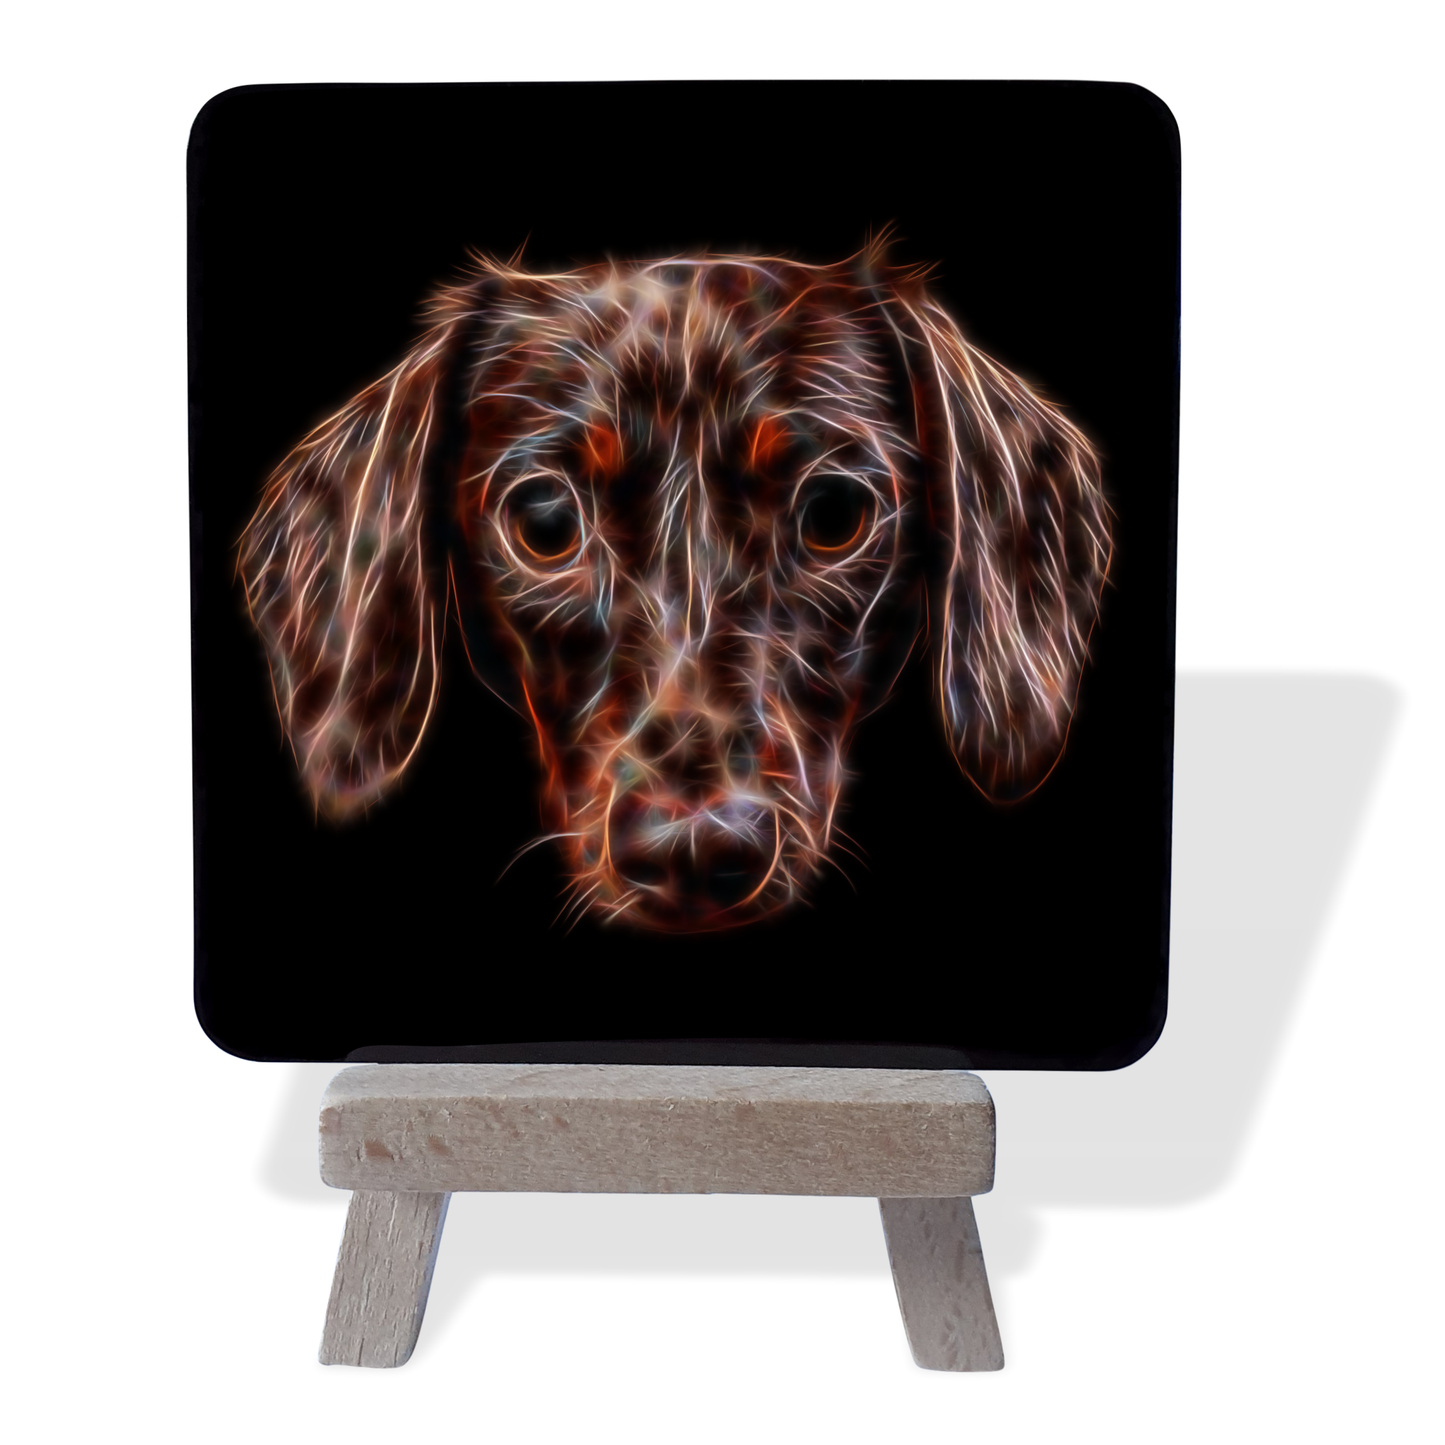 Chocolate Dachshund #2 Metal Plaque and Mini Easel with Fractal Art Design